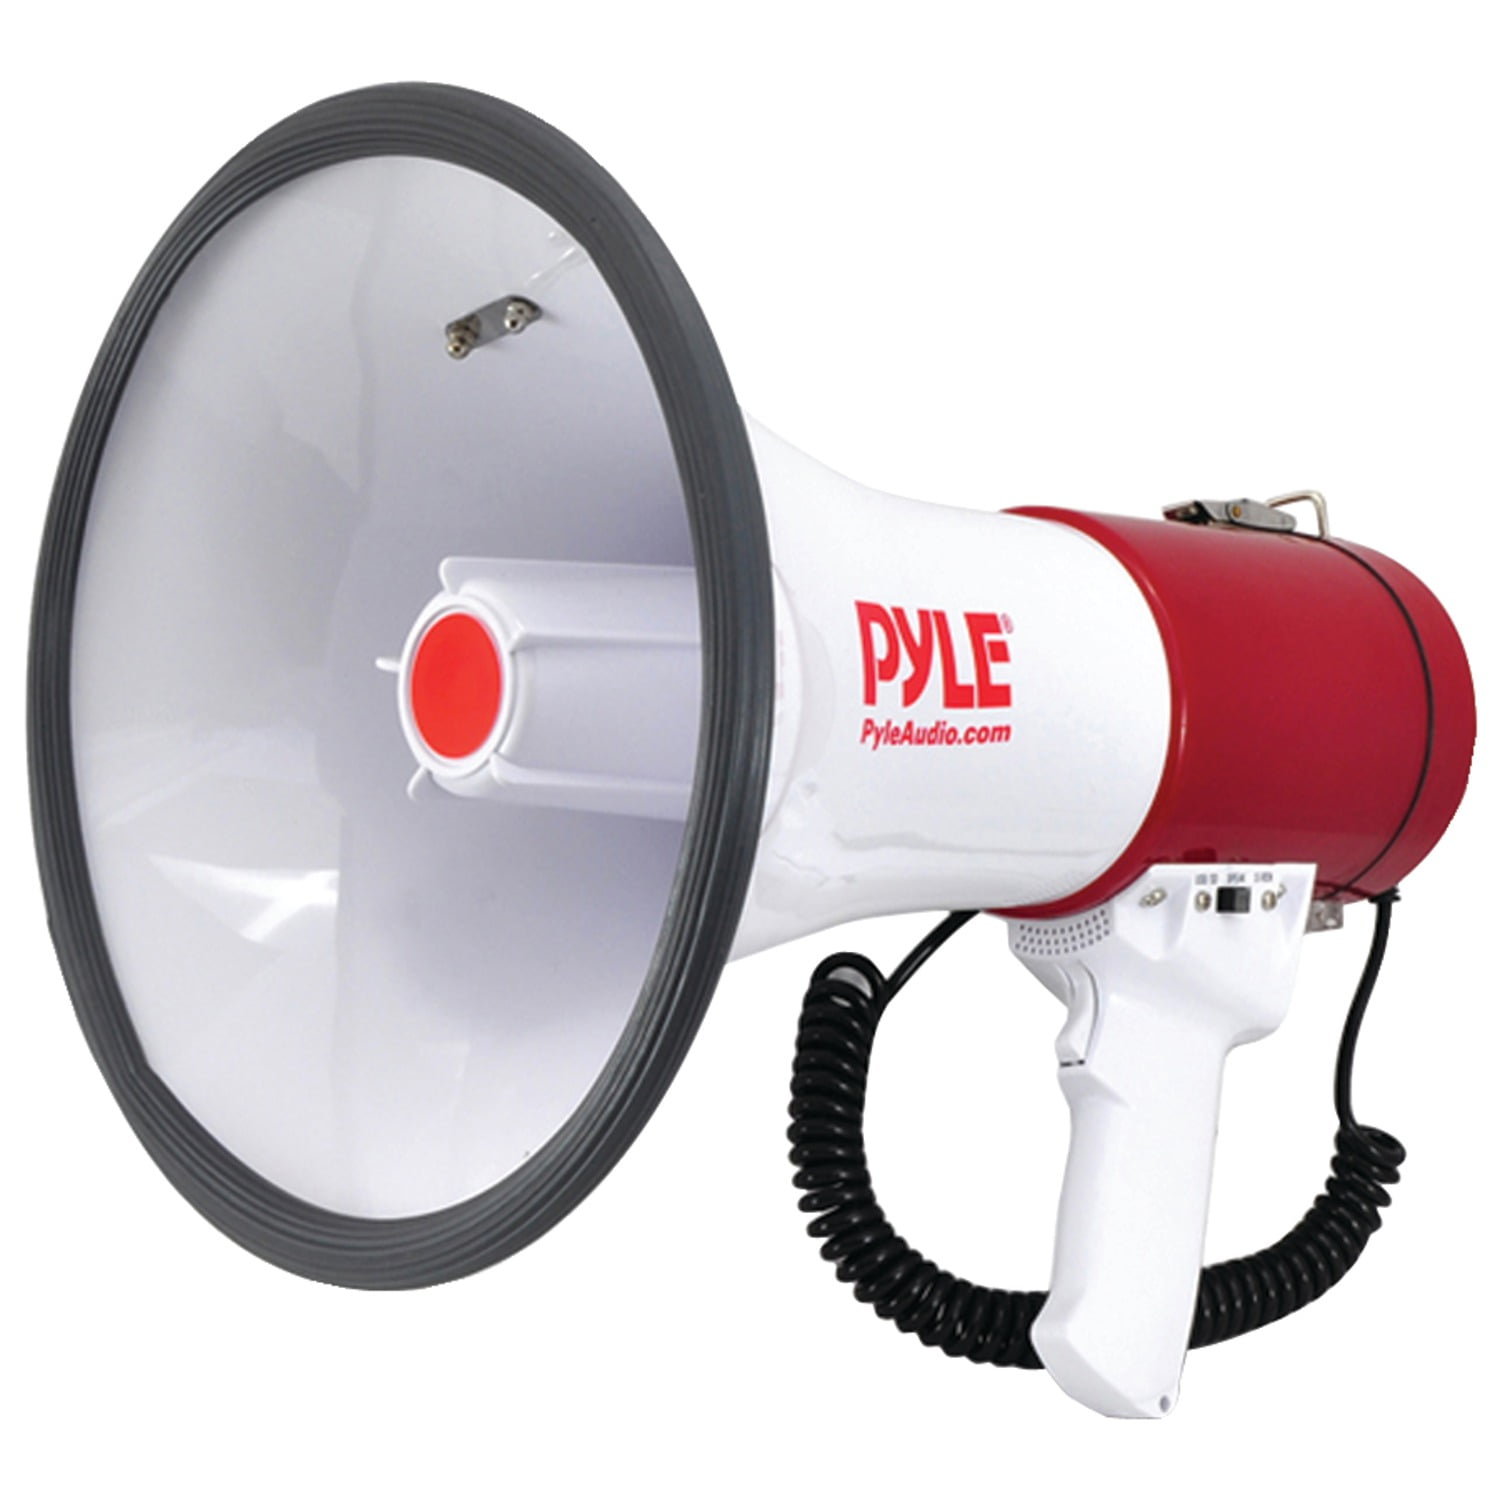 Pyle 40w Mini Megaphone With Siren PMP40 for sale online 